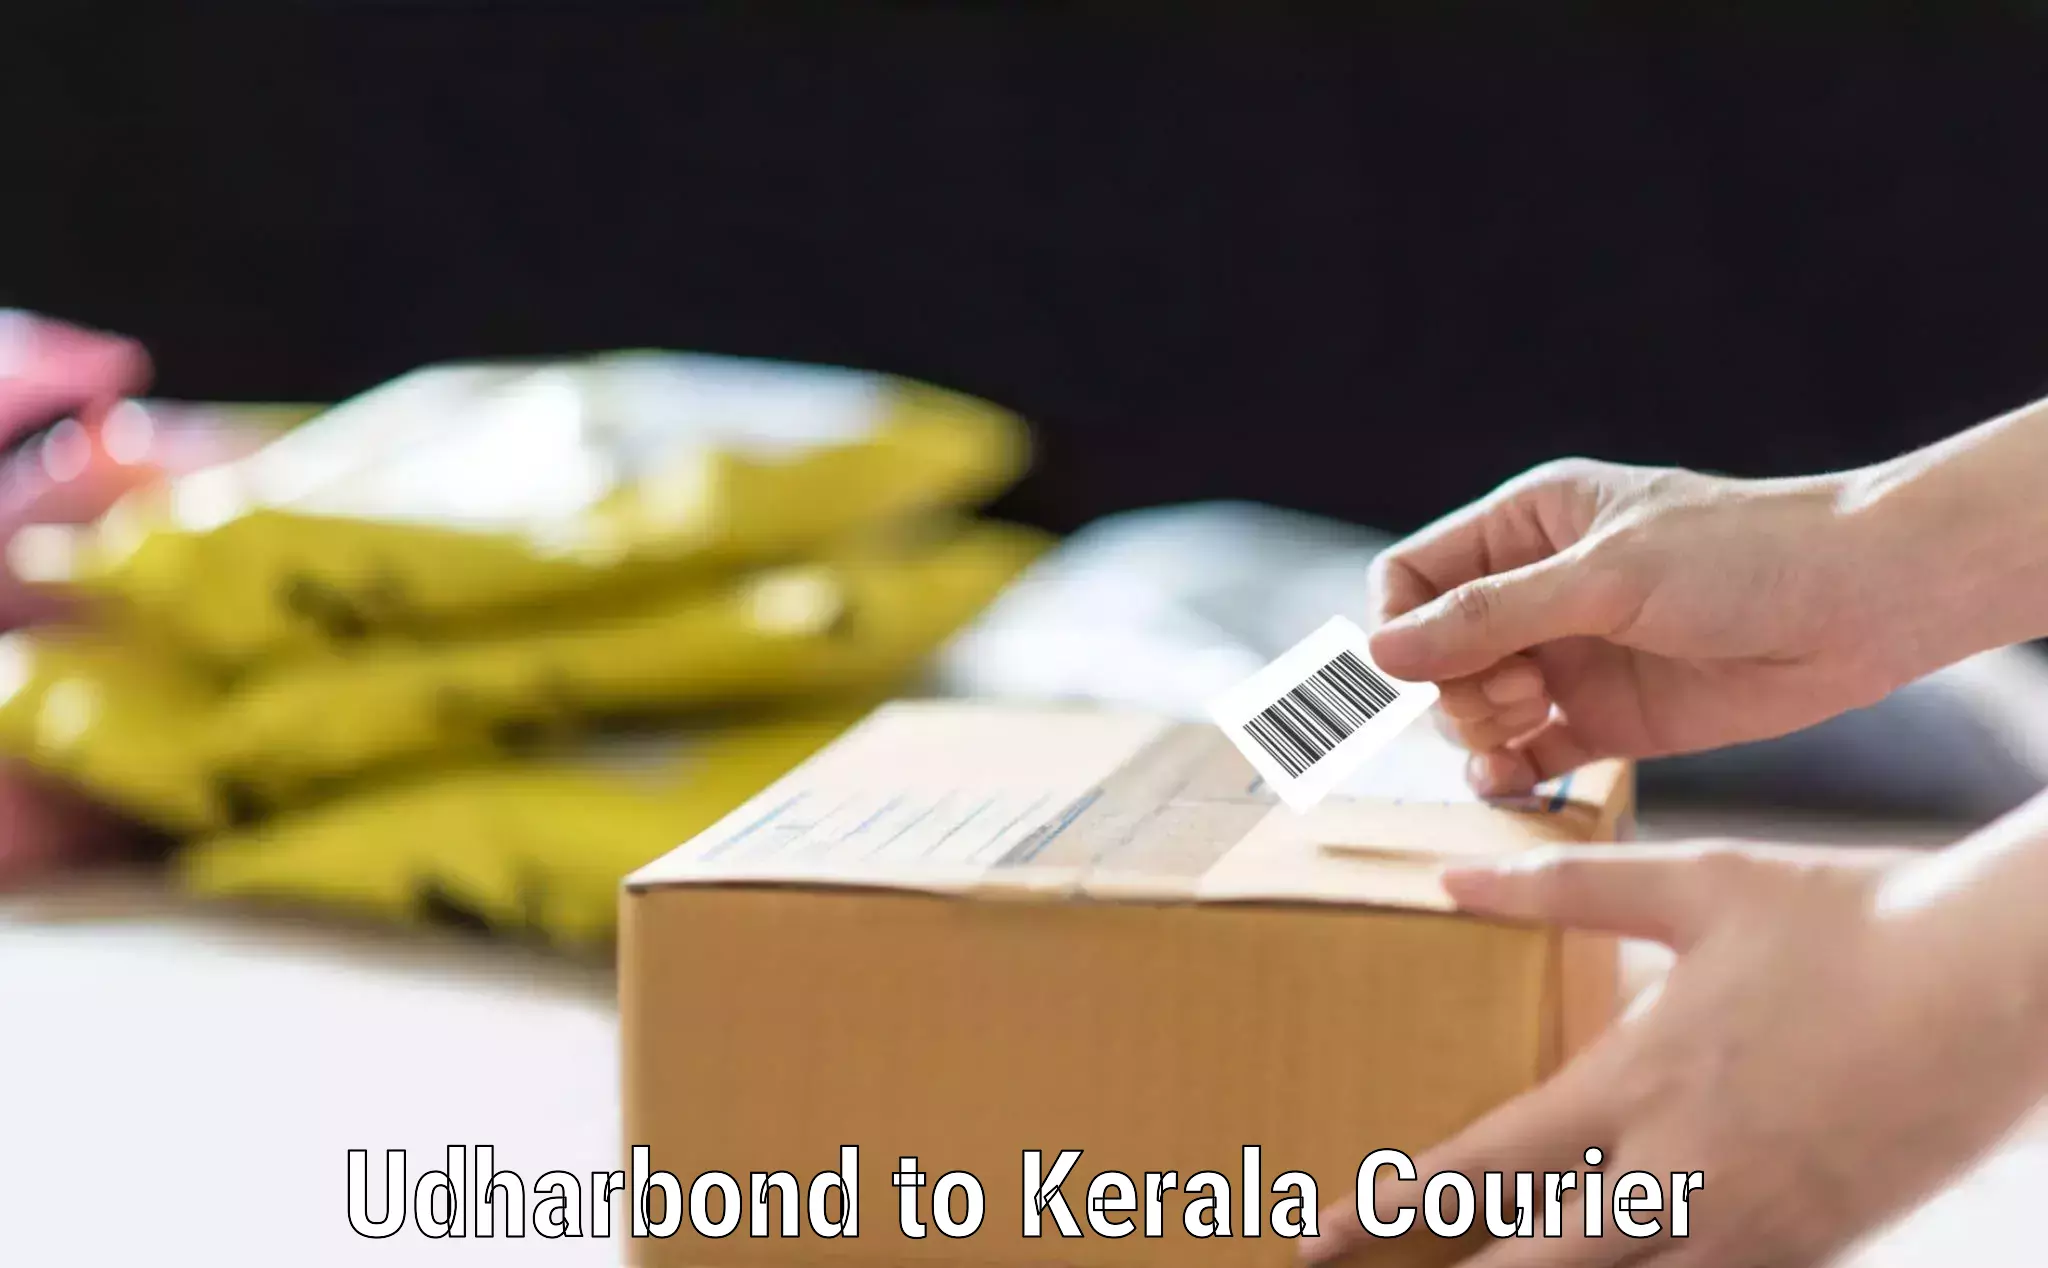 Baggage shipping rates calculator Udharbond to Kerala